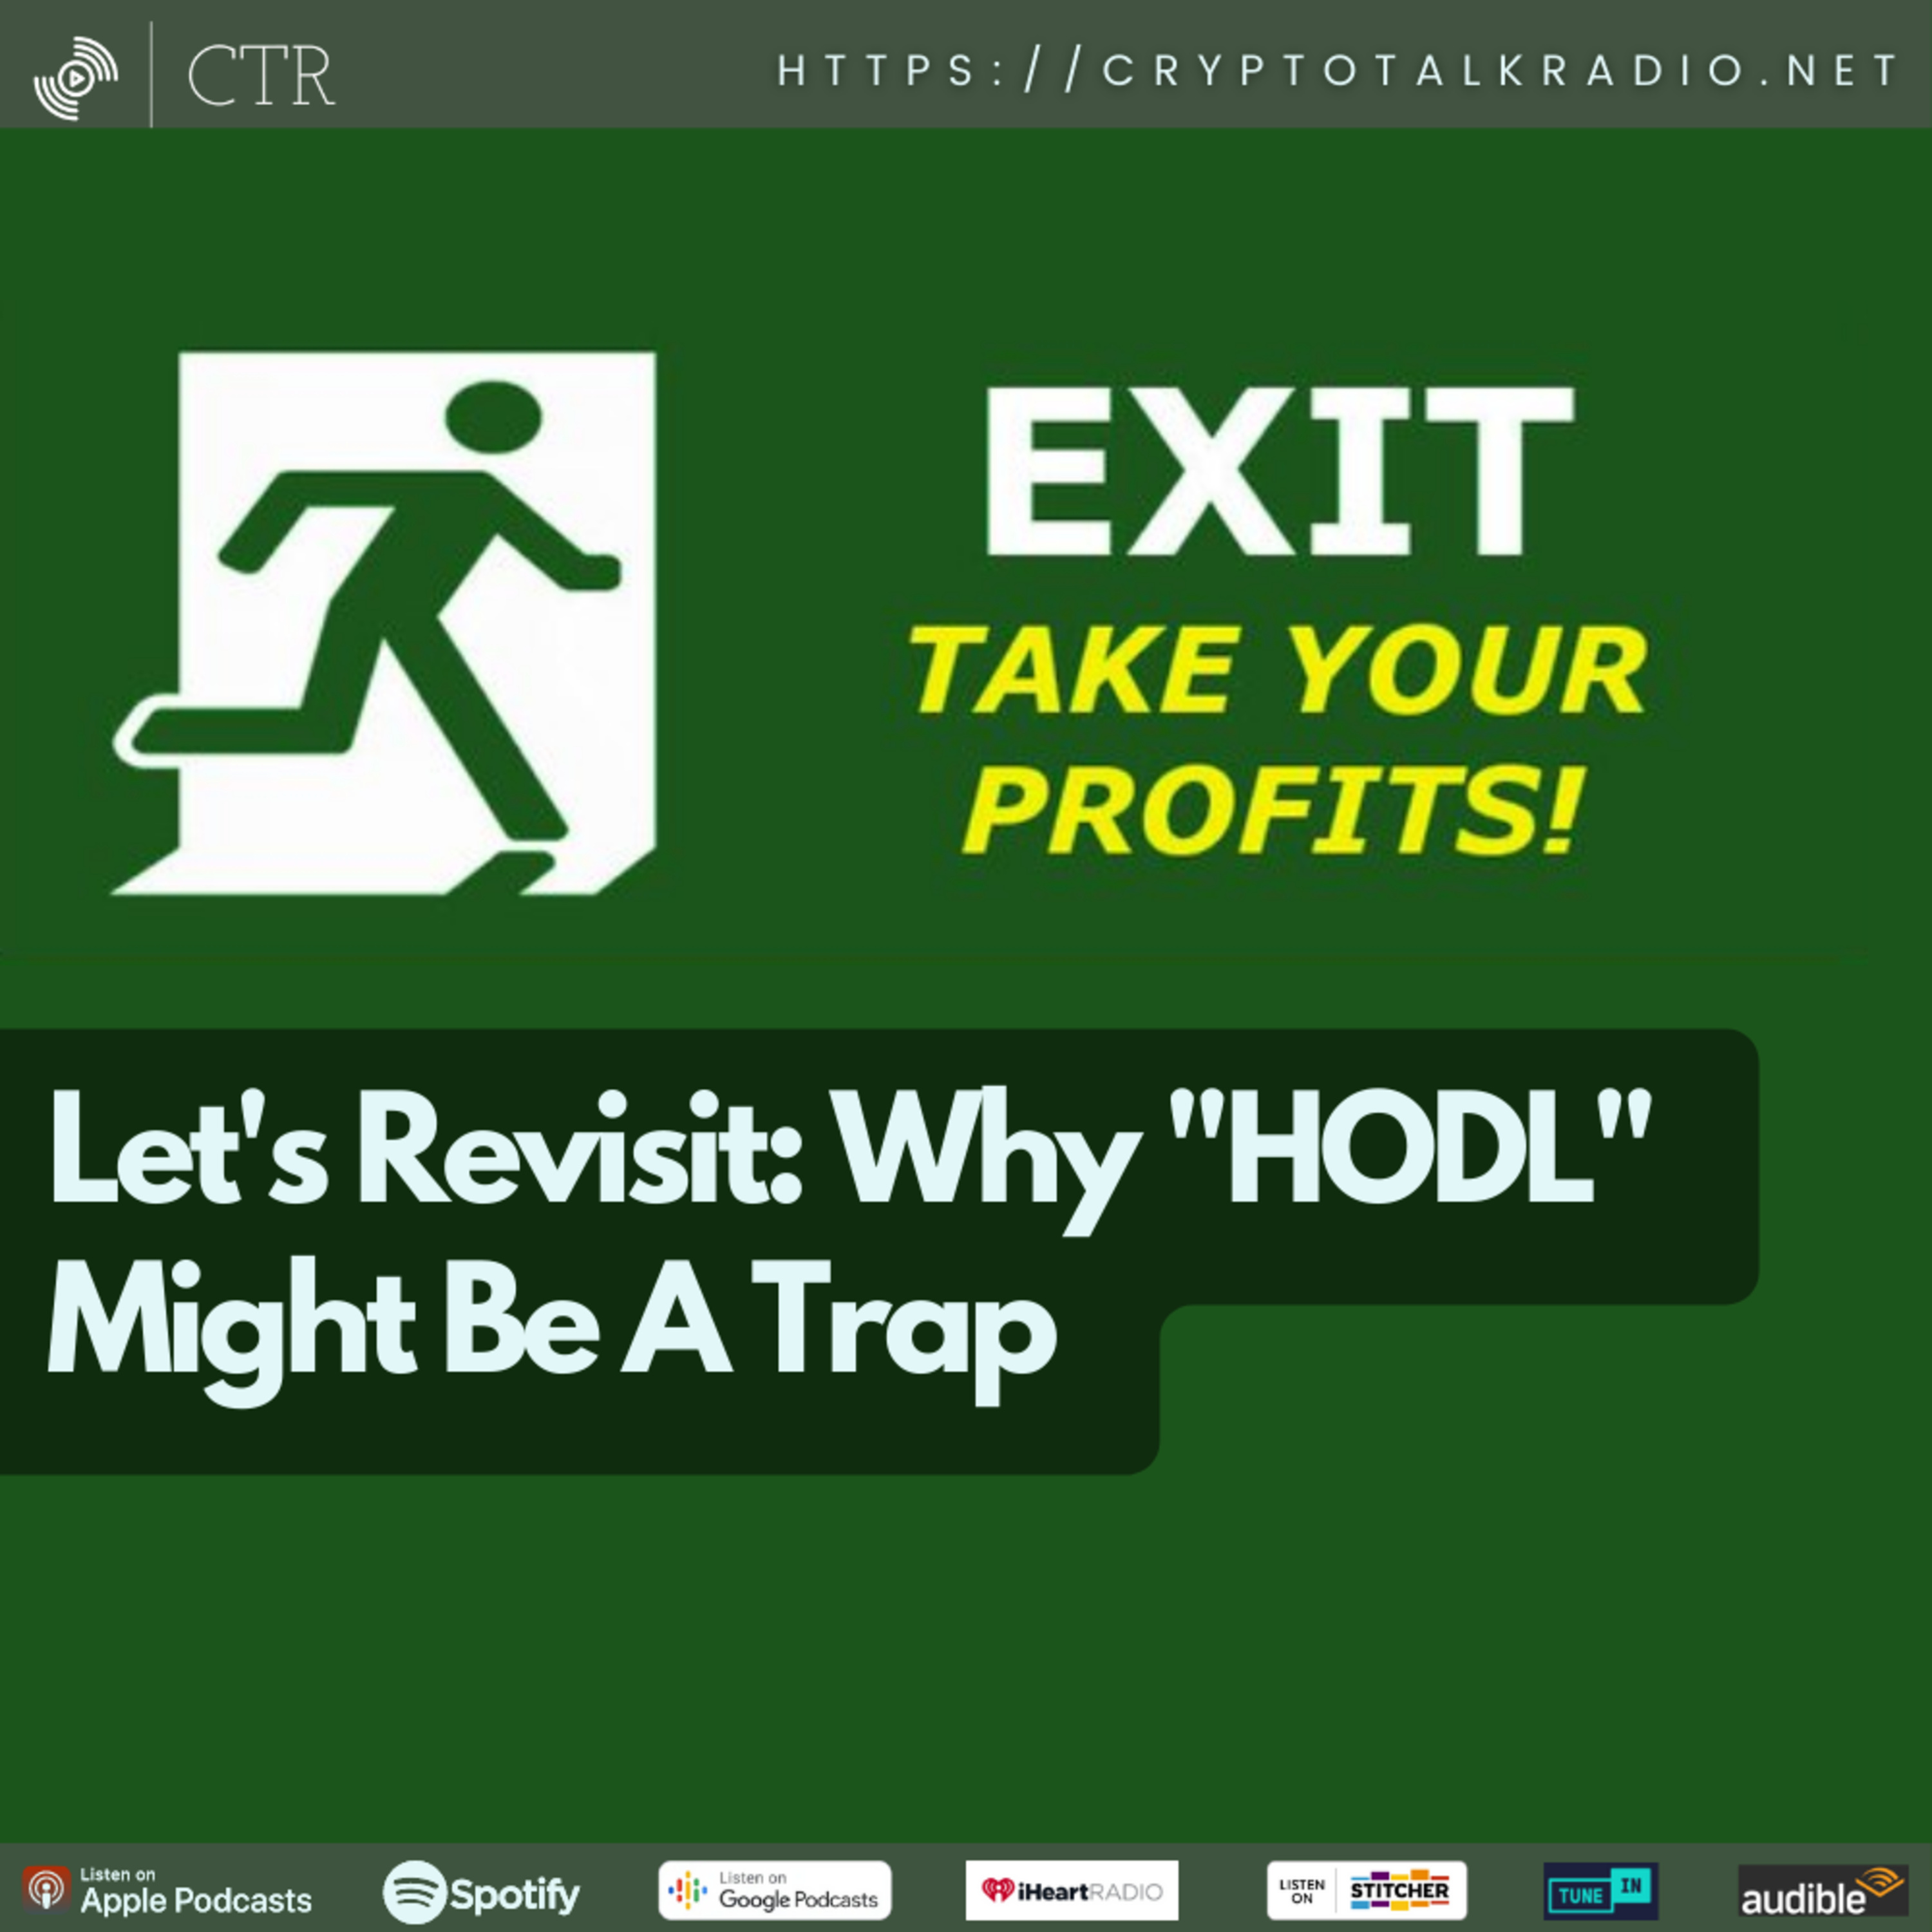 Let's Revisit: Why #HODL Might Be A Trap